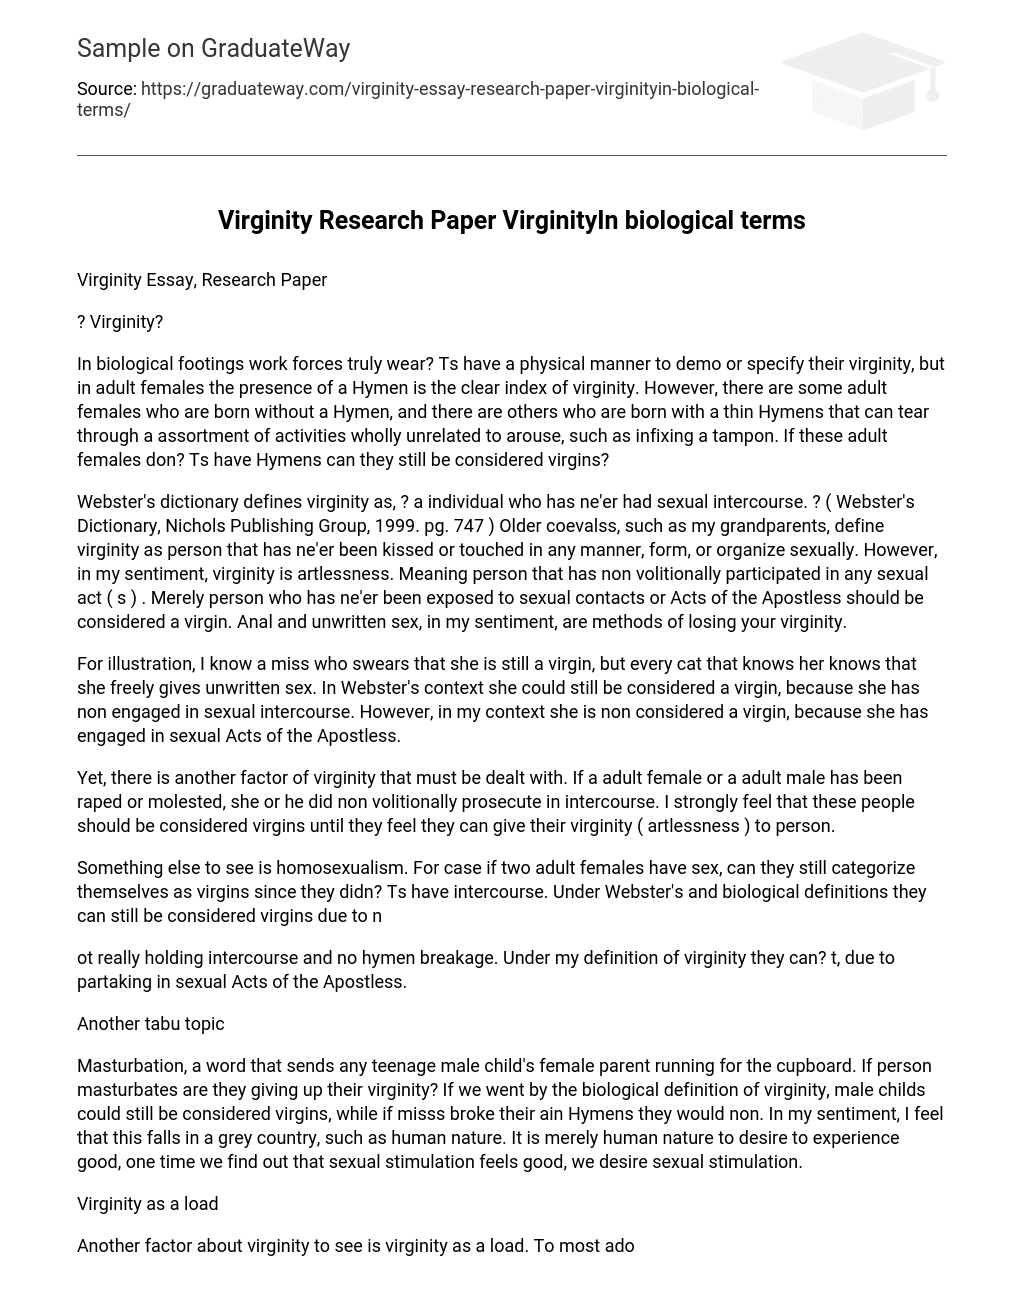 Virginity Research Paper VirginityIn biological terms